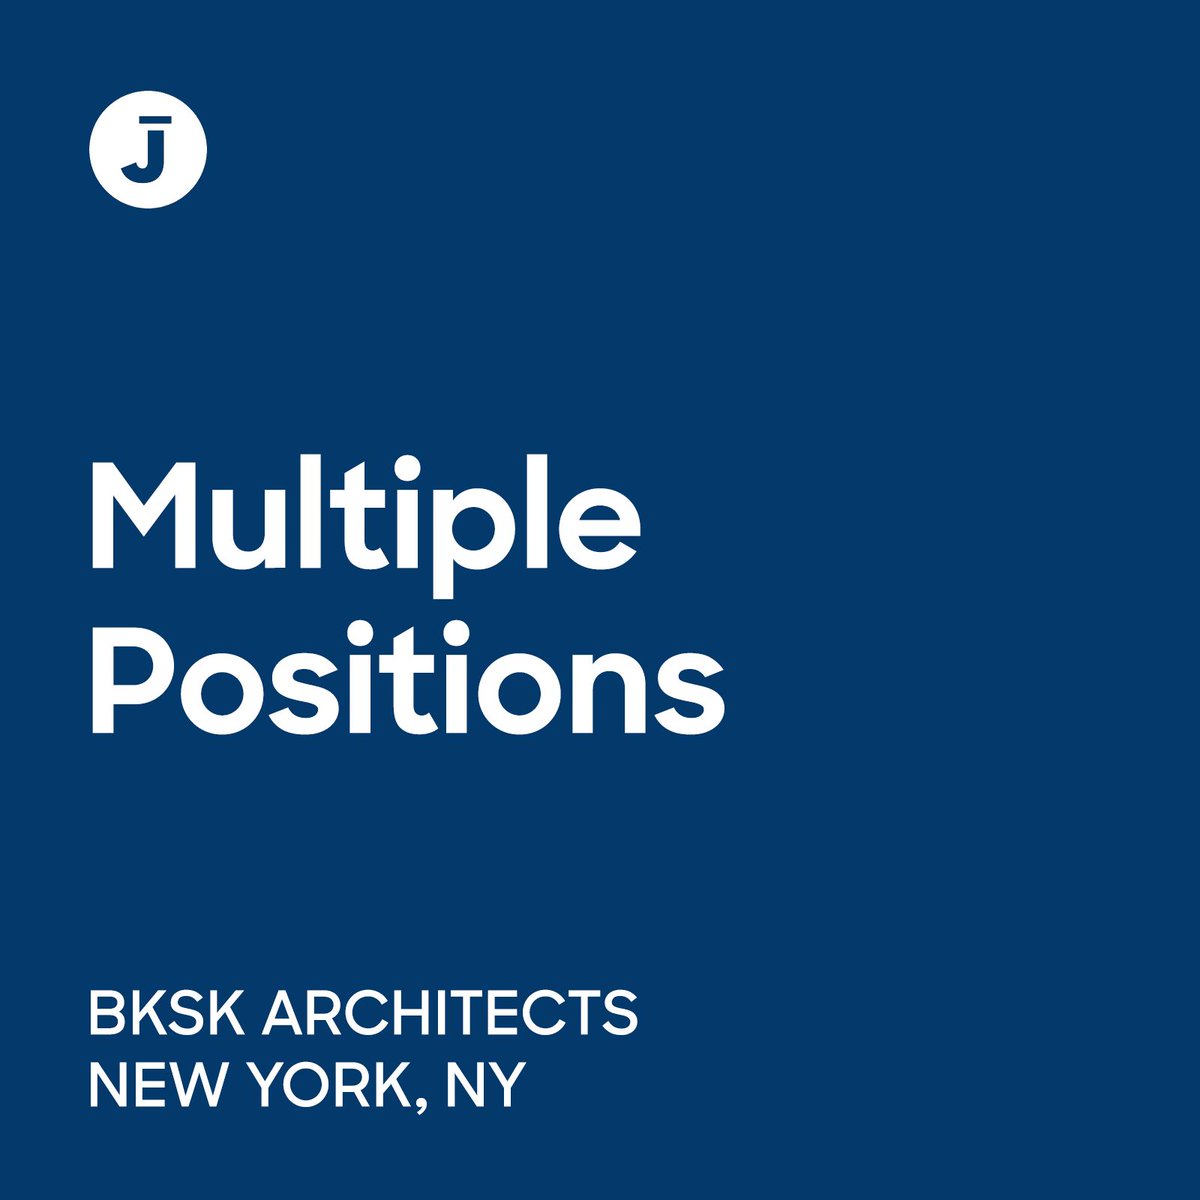 Today's Employer of the Day is BKSK Architects @BKSKarchitects. They're hiring an Interior Architect/Archit. Designer, Interm. Architect, and Project Architect/Project Manager in NYC.

buff.ly/3Uc7GBK

#ArchinectJobs #ArchinectEOTD #ArchitectureJobs #NewYorkJobs #NYCJobs